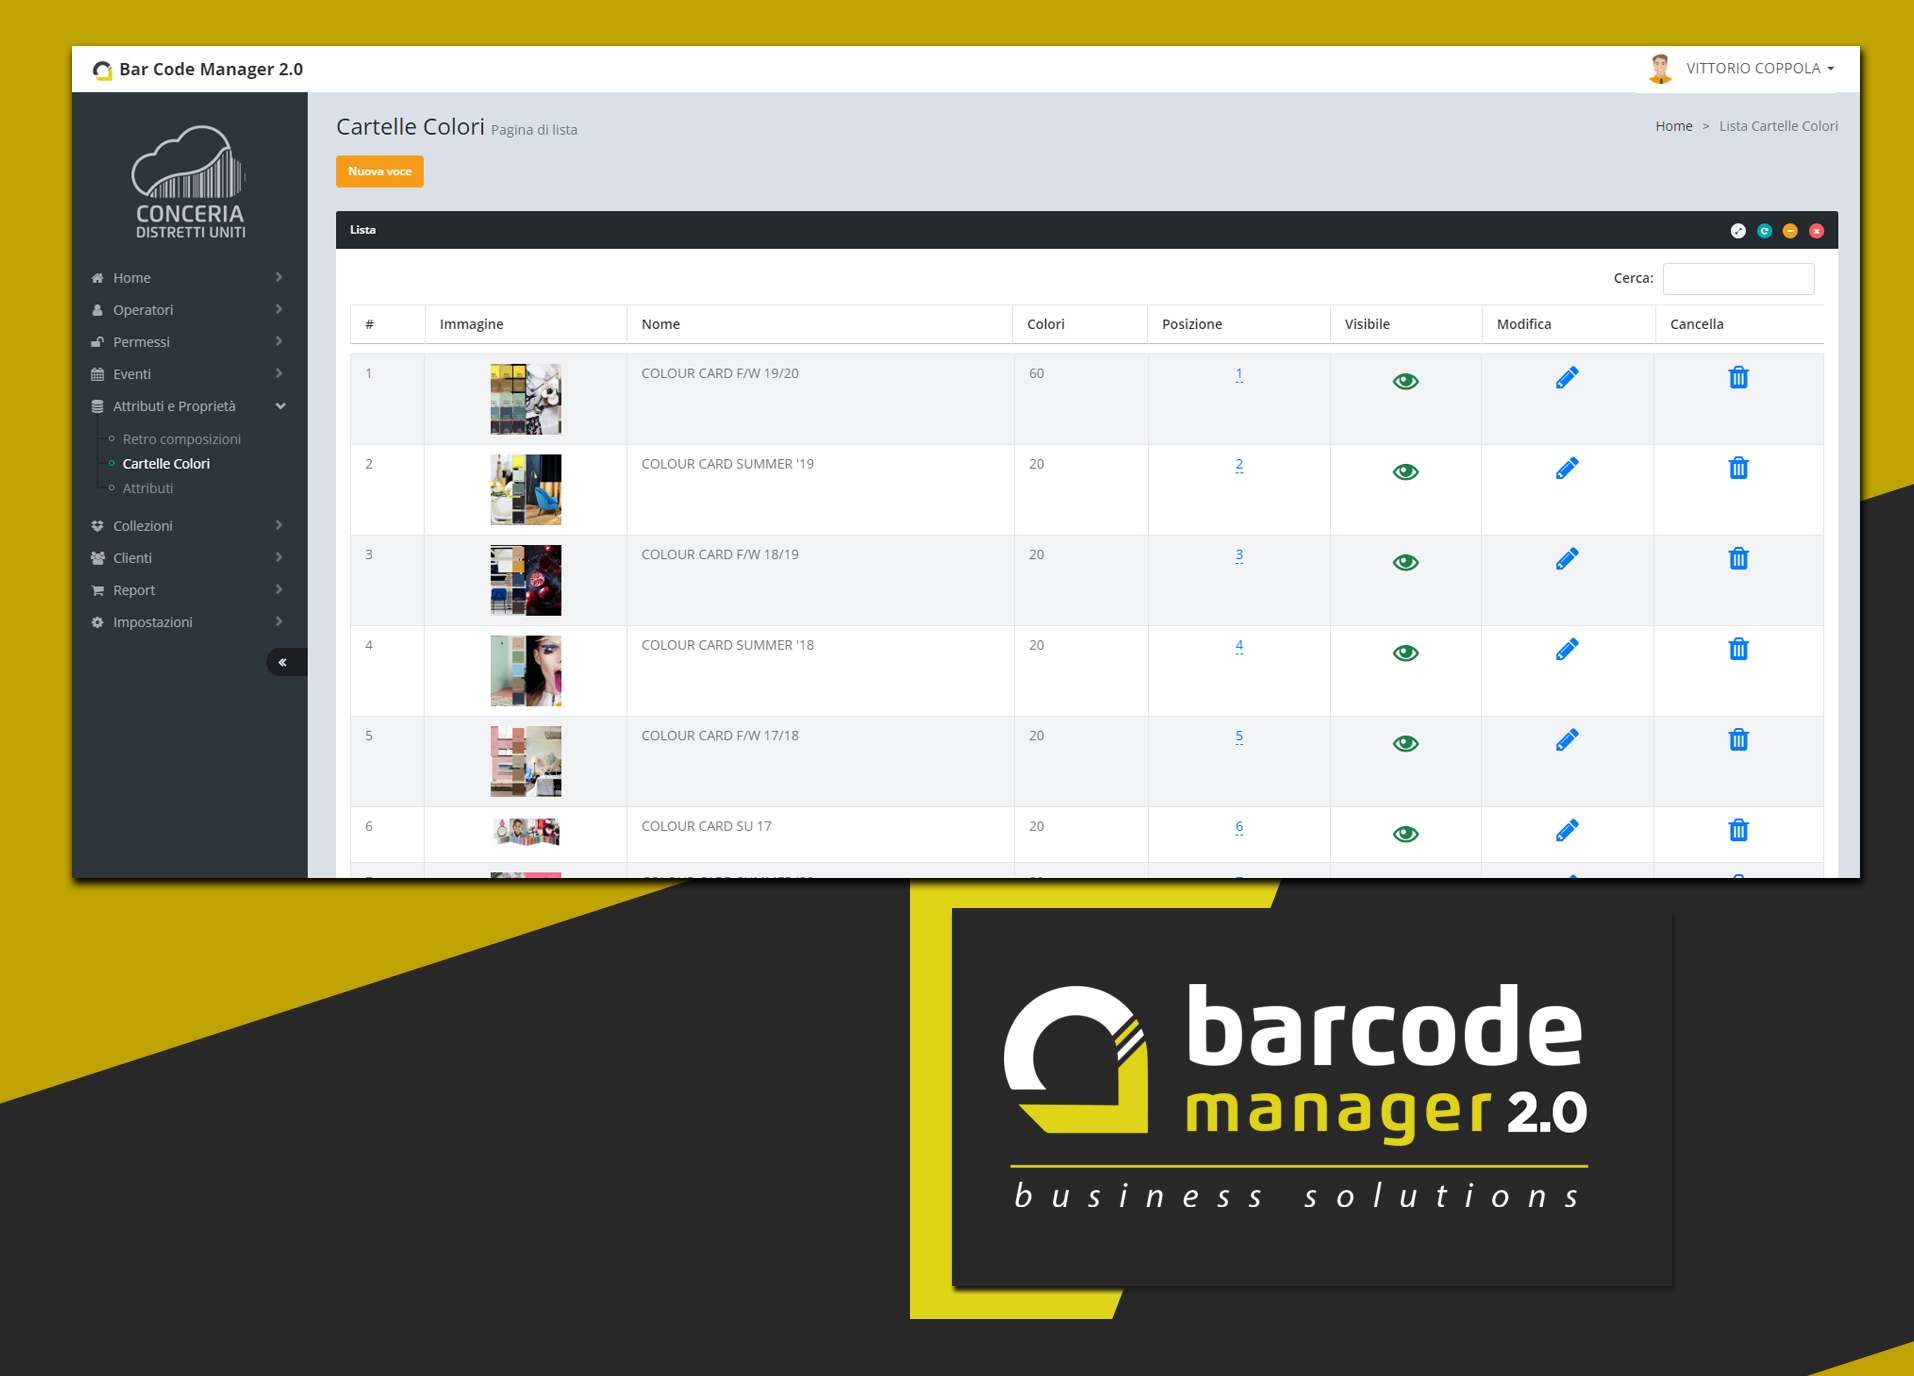 BARCODE MANAGER